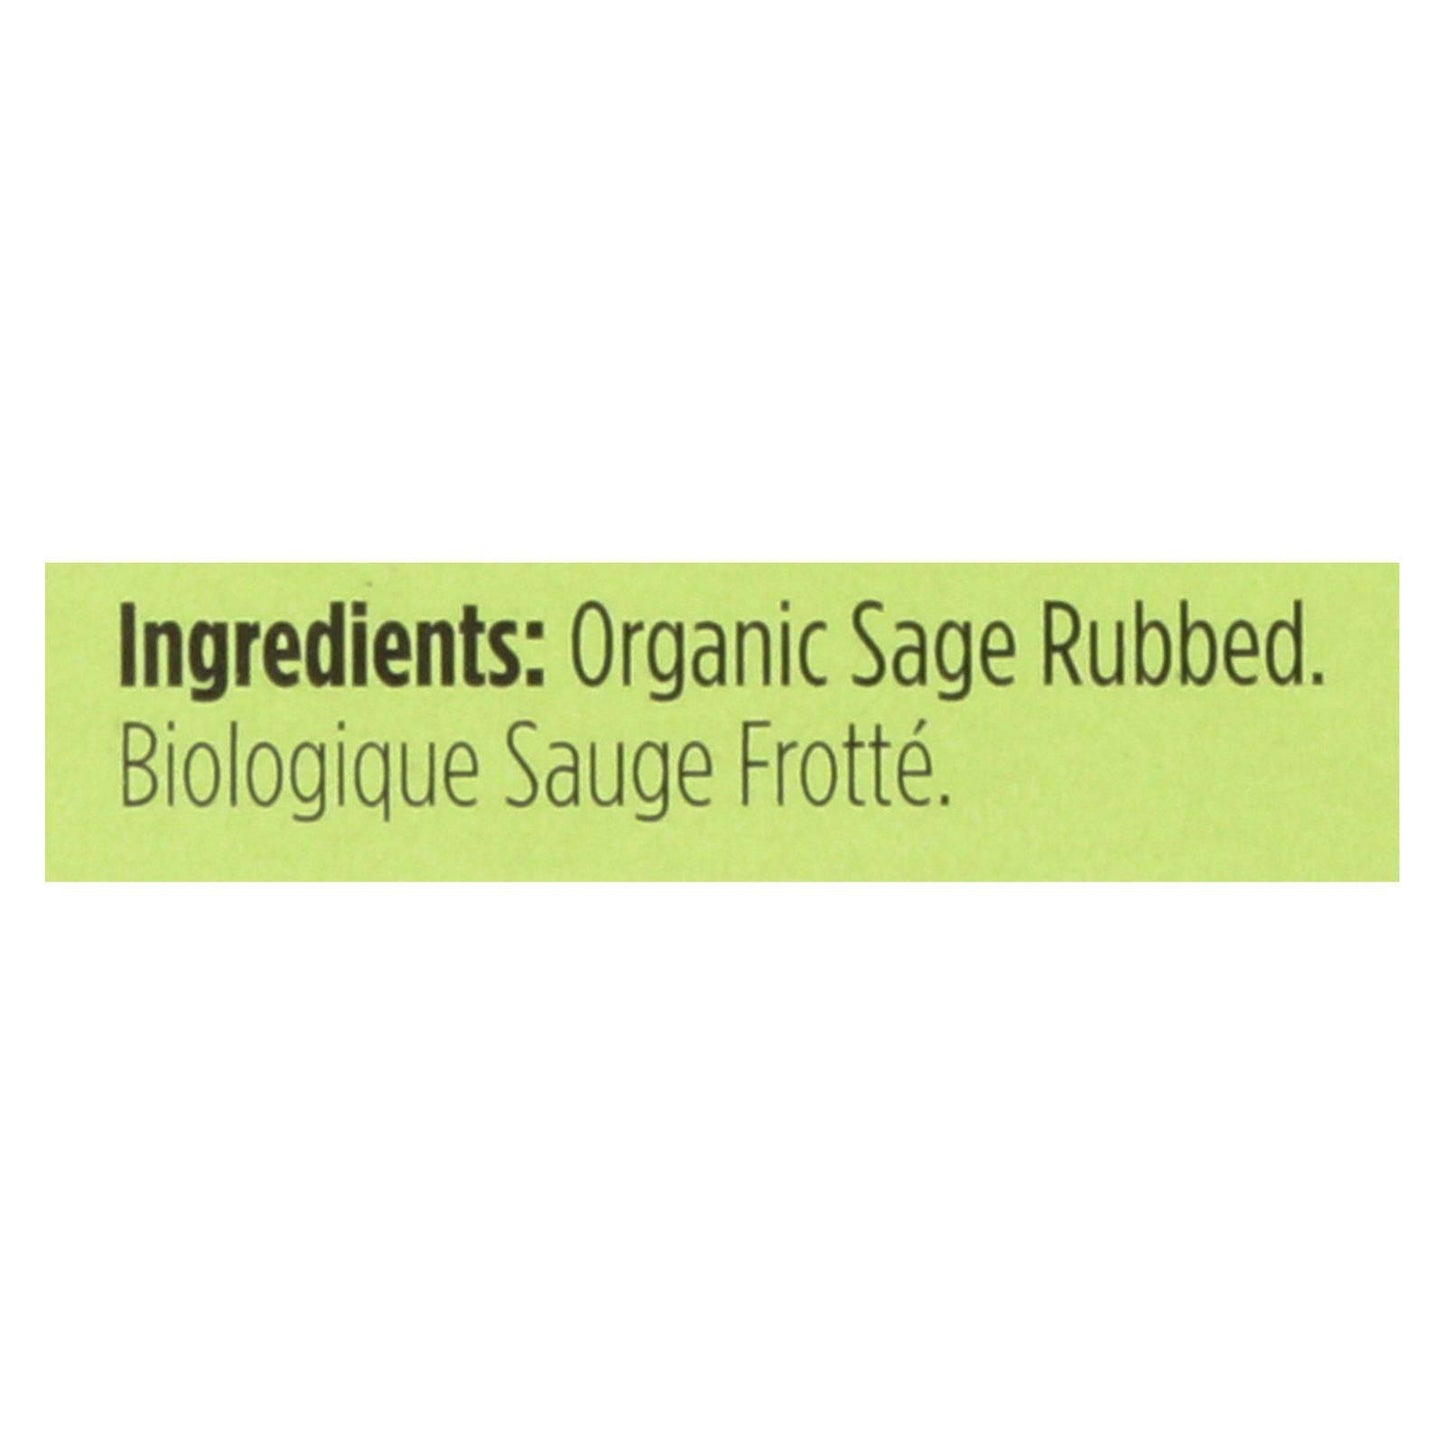 Buy Spicely Organics - Organic Sage - Rubbed - Case Of 6 - 0.1 Oz.  at OnlyNaturals.us